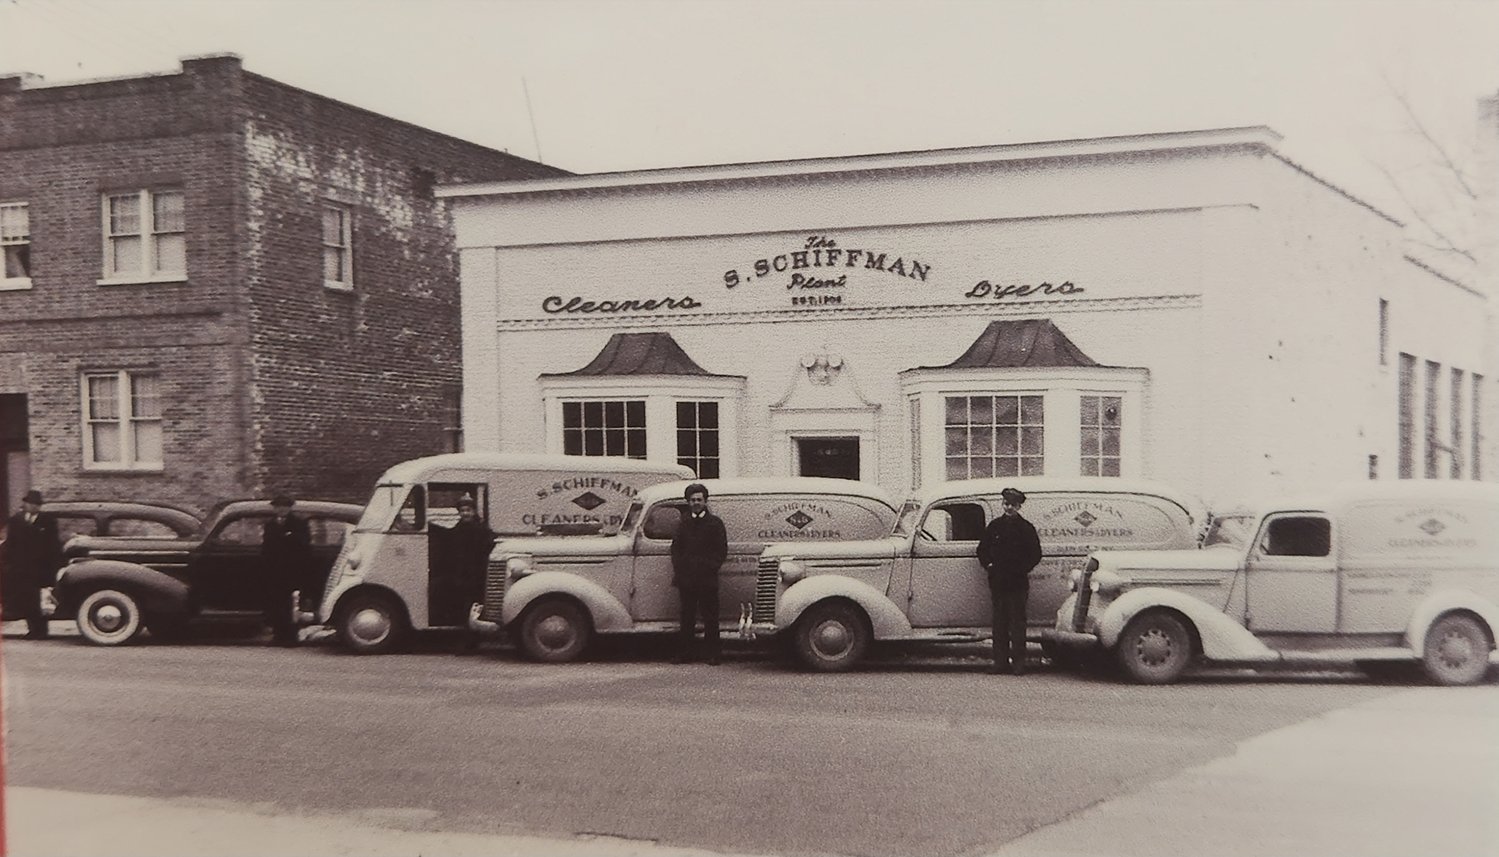 This photo from the 1940s of Schiffman’s Cleaners and Dyers, a family business on Glen Cove Avenue, is included in the exhibition at the Long Island Jewish Museum. Today the block is the site of Sorenson’s Lumber.